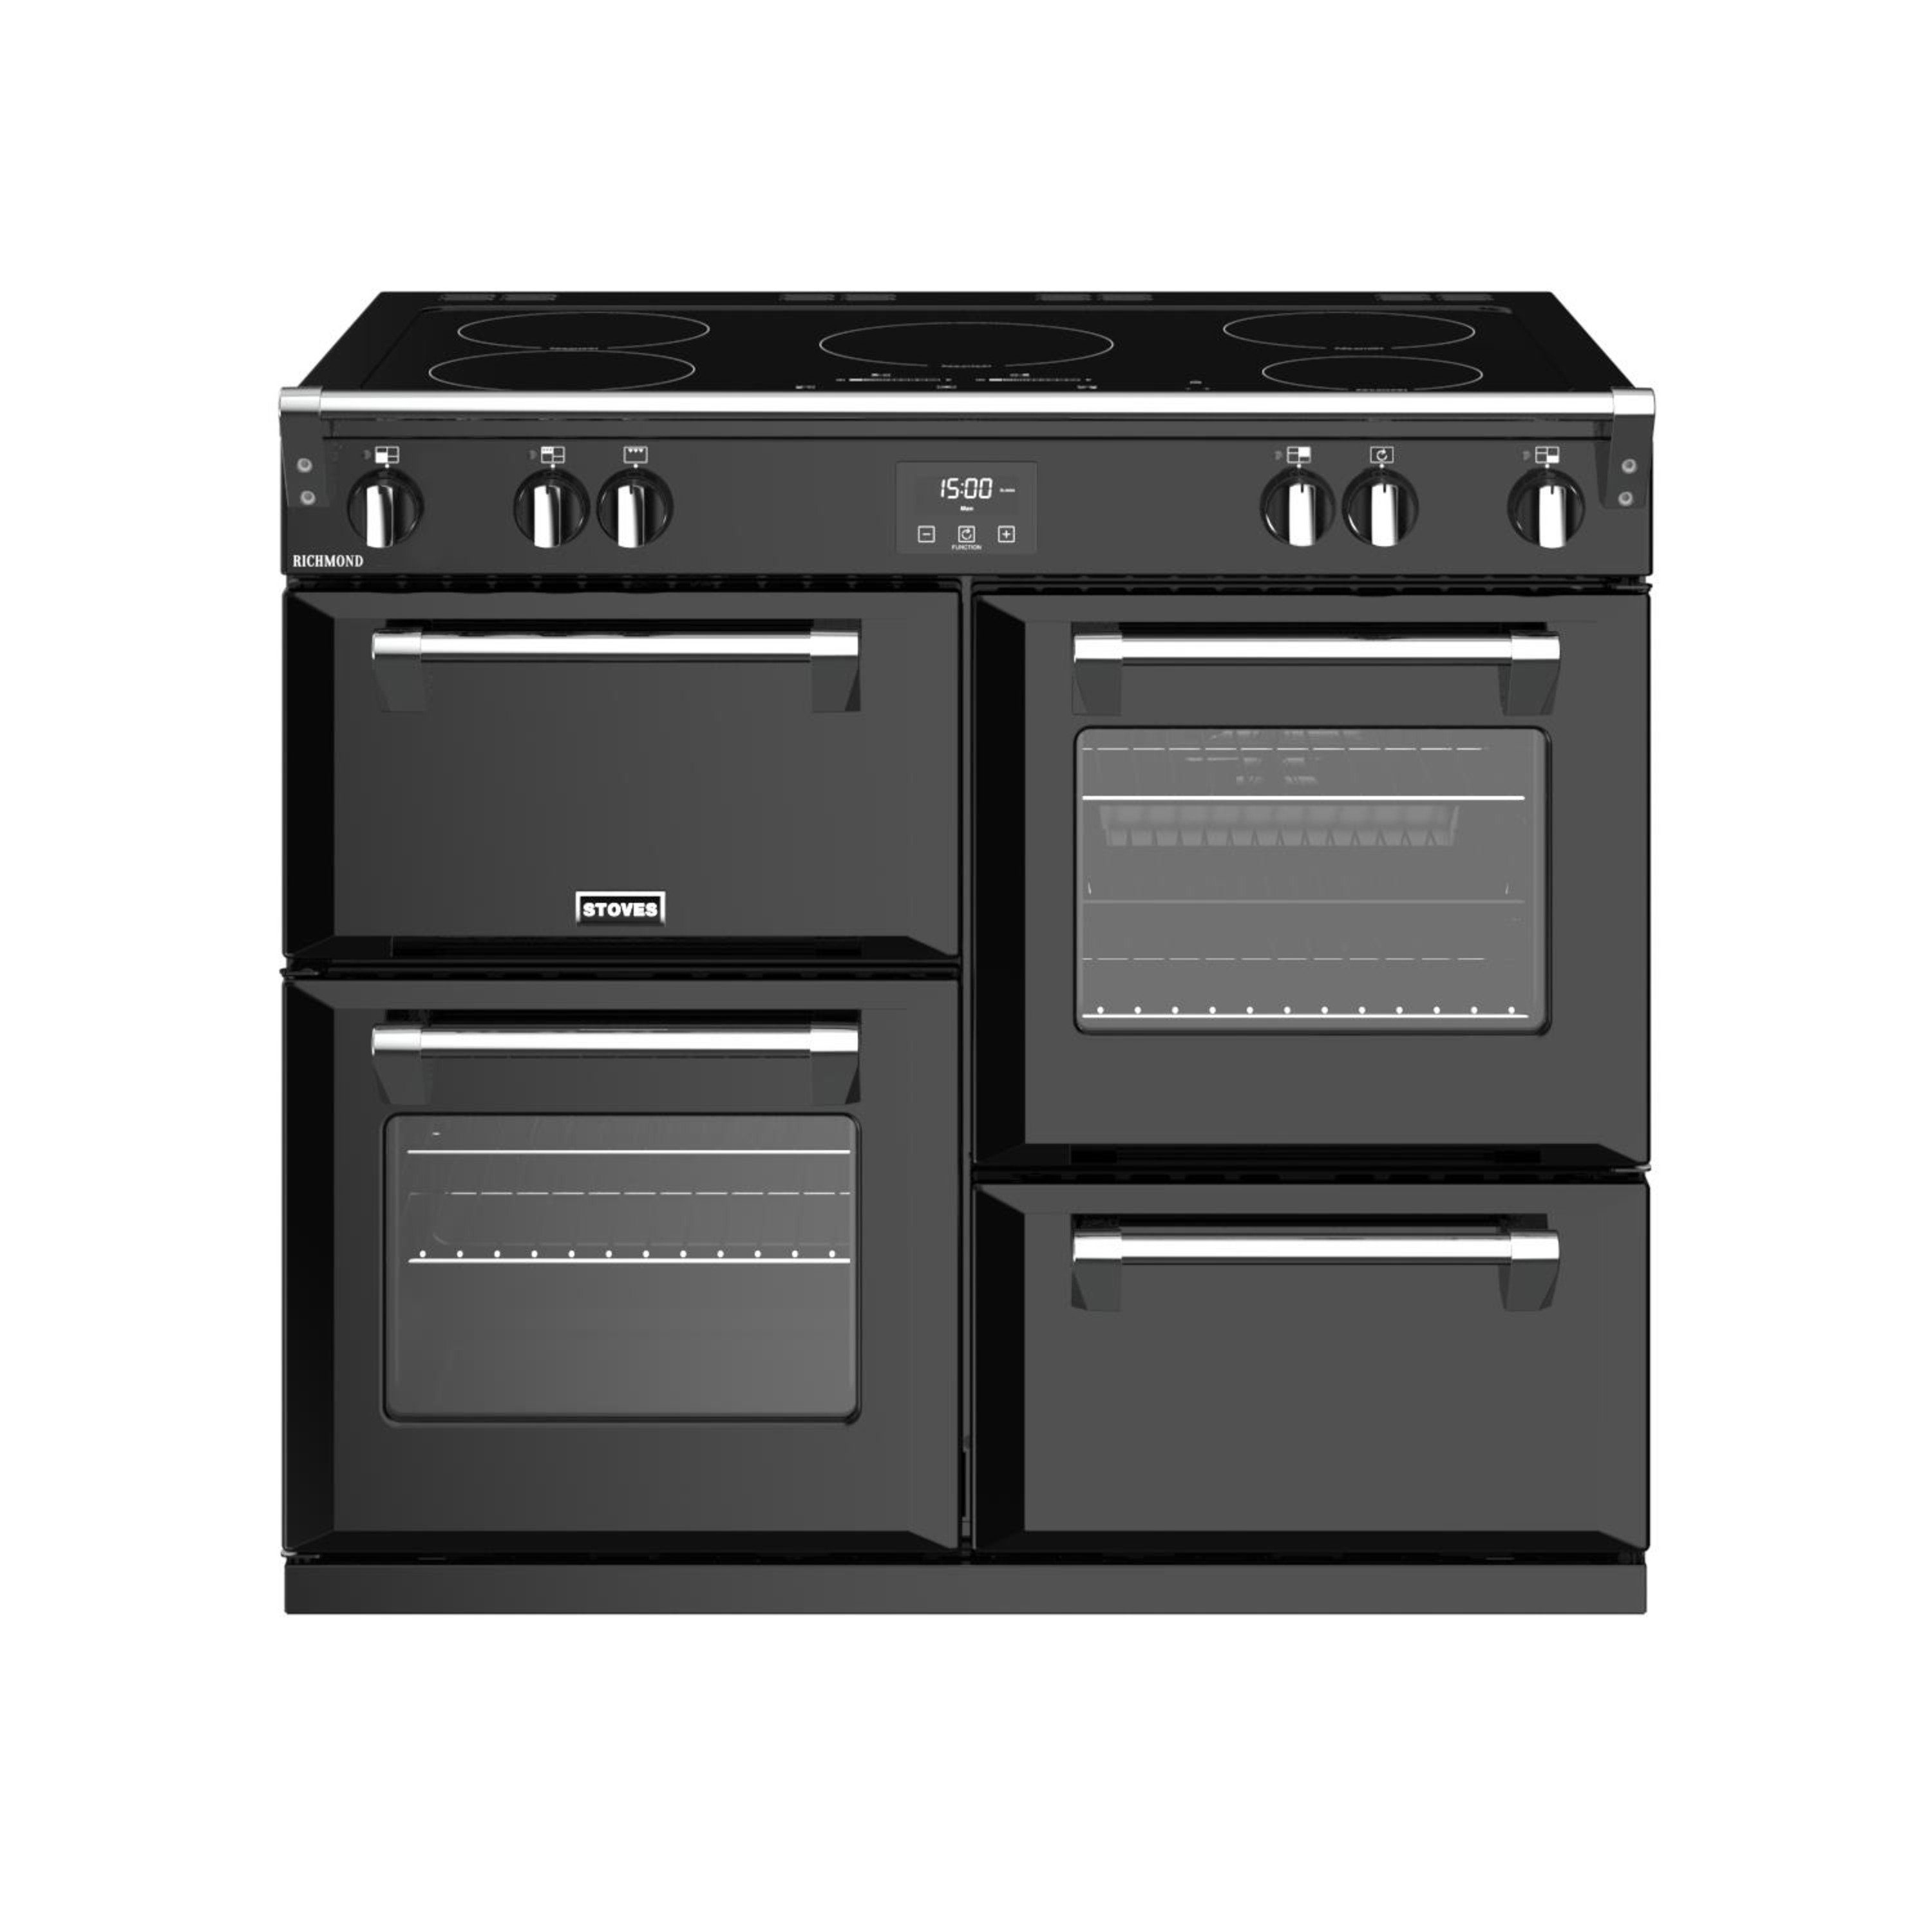 100cm electric induction range cooker with a 5 zone touch control induction hob, conventional oven & grill, multifunction main oven, fanned second oven, and dedicated slow cook oven